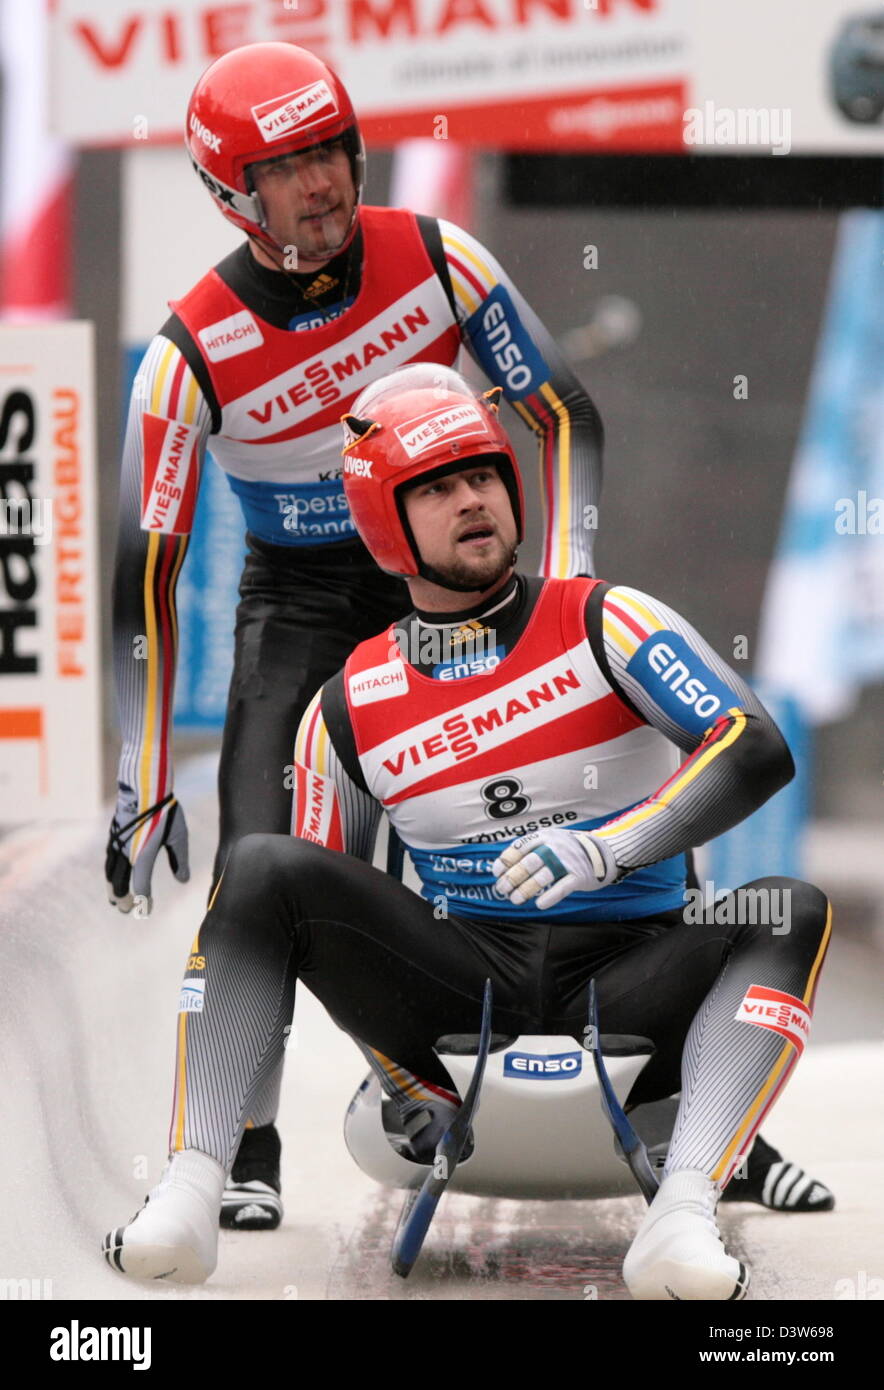 German lugers Sebastian Schmidt (front) and Andre Forker cheer claiming the third rank at the Luge World Cup in Koenigssee, Germany, Saturday, 06 January 2007. Photo: Frank Leonhardt Stock Photo